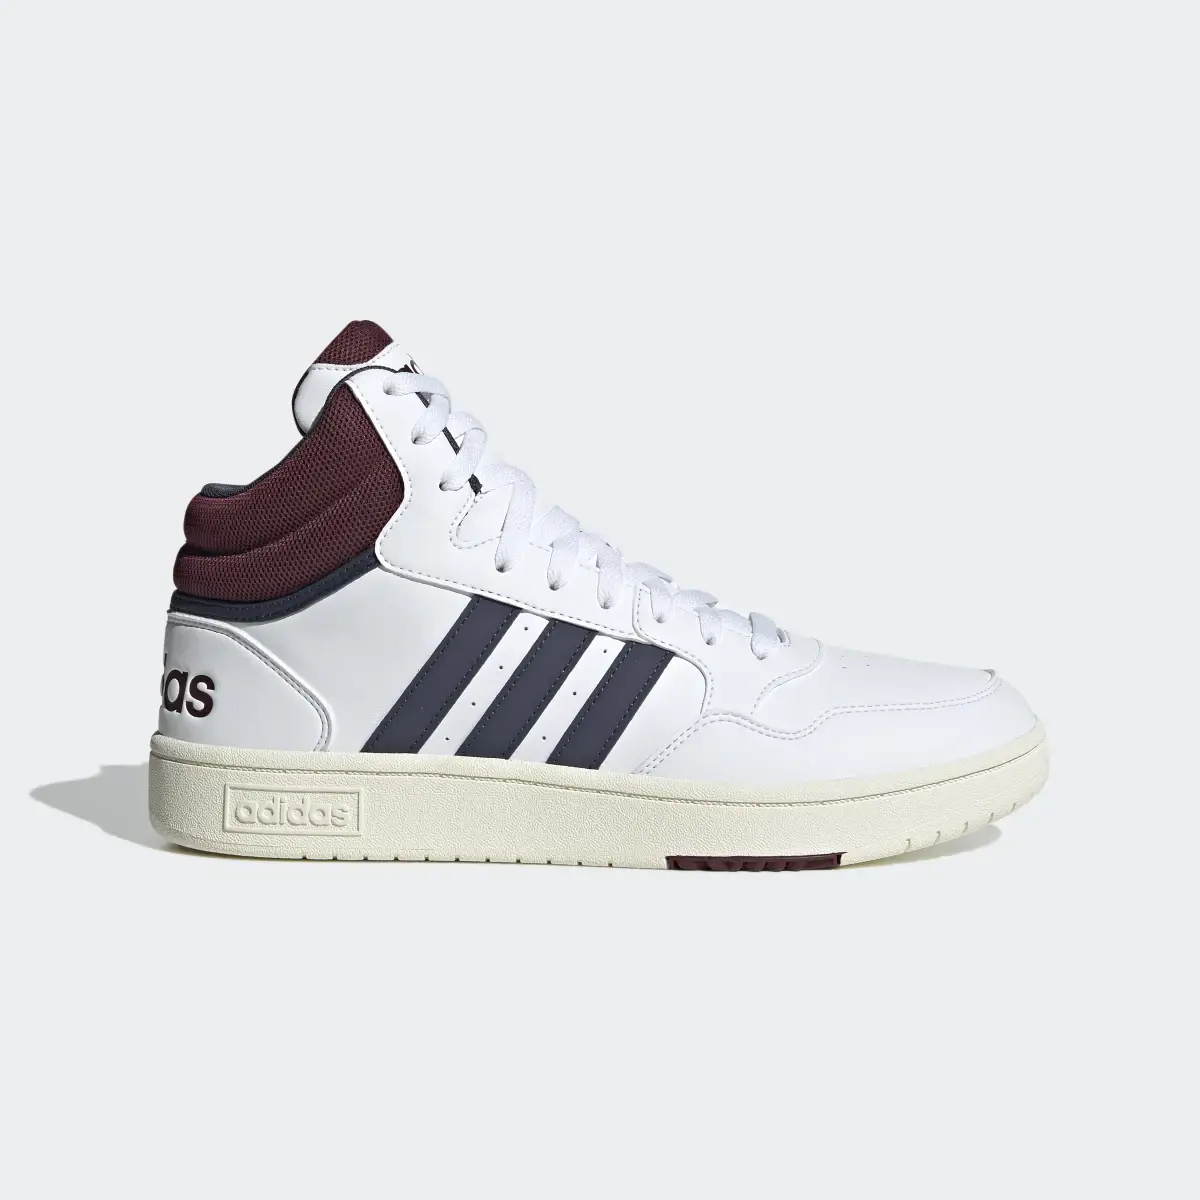 Adidas Hoops 3.0 Mid Lifestyle Basketball Classic Vintage Schuh. 2